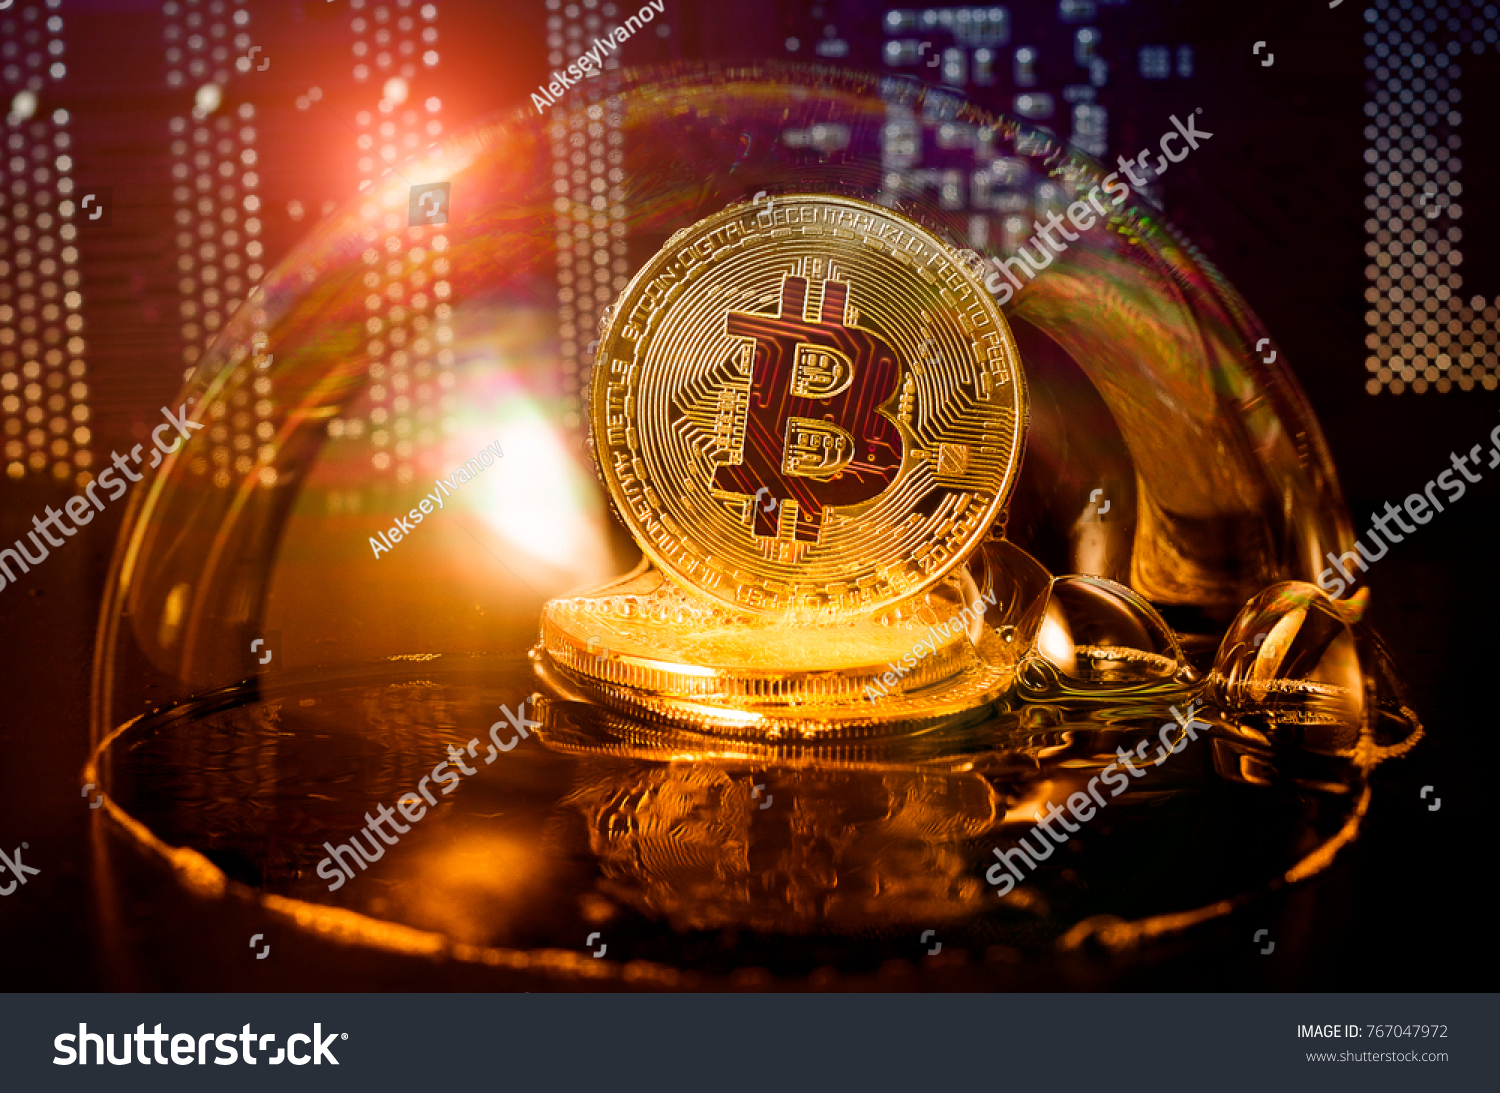 Bitcoin in a soap bubble on video card background. Dangers and risks of investing to bitcoin. Speculation #767047972